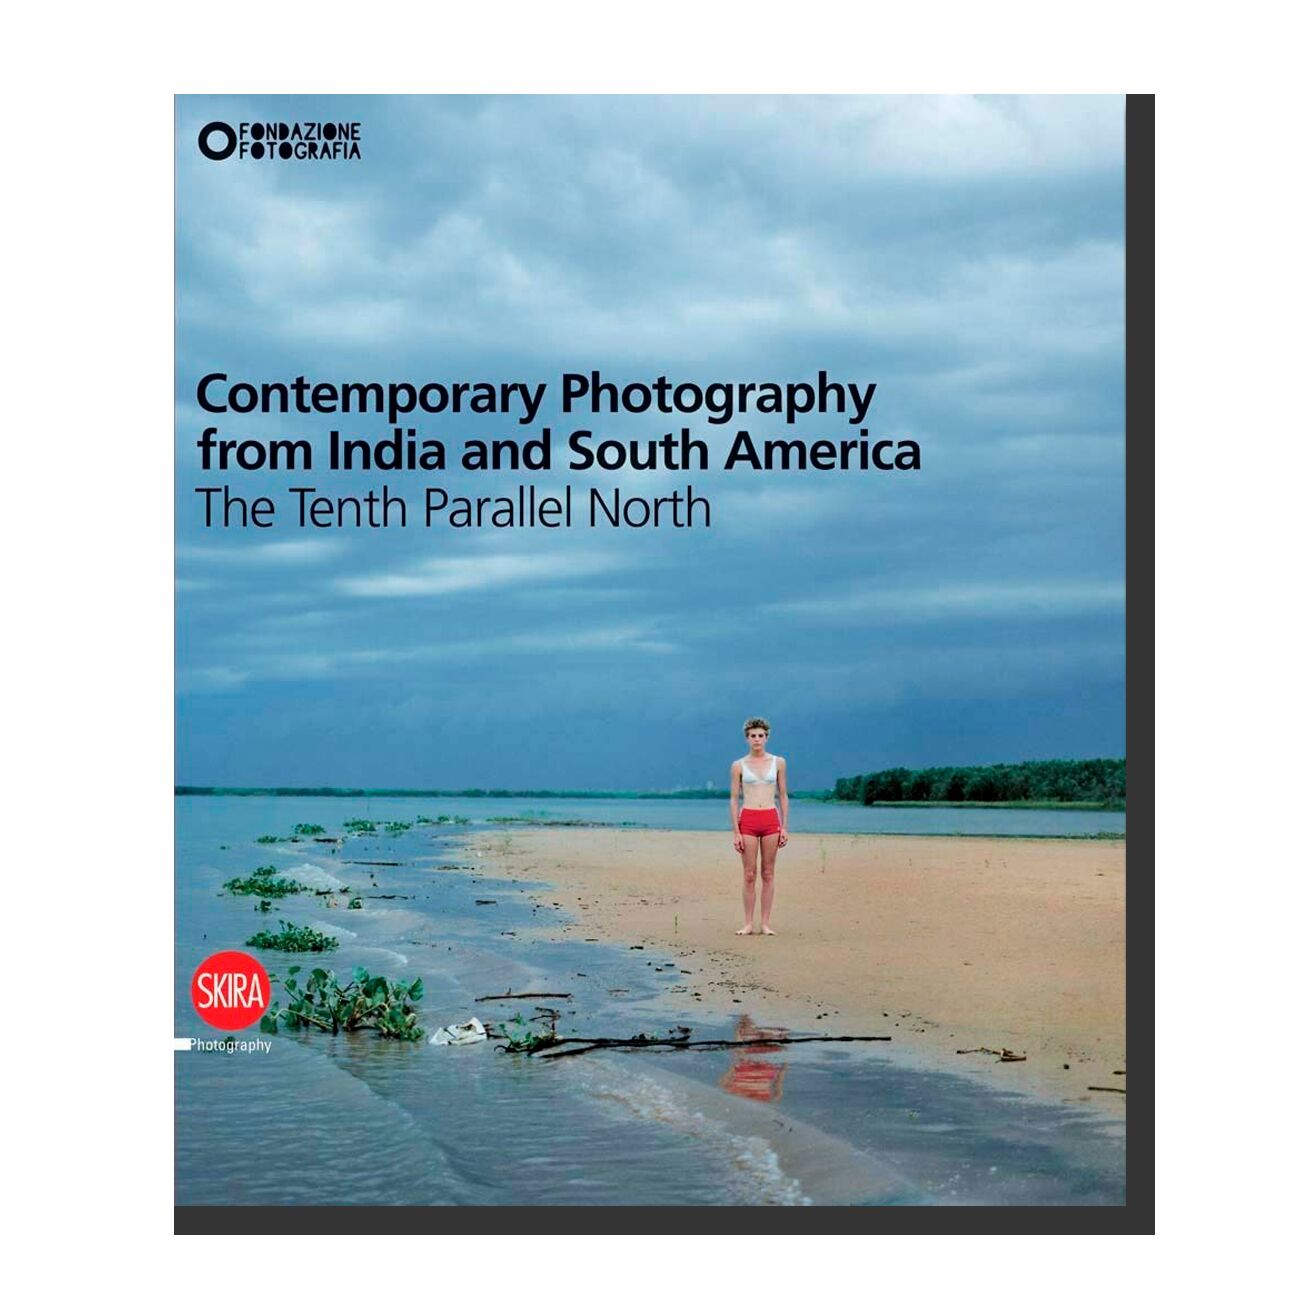 Contemporary Photography from India and South America: The Tenth Parallel North